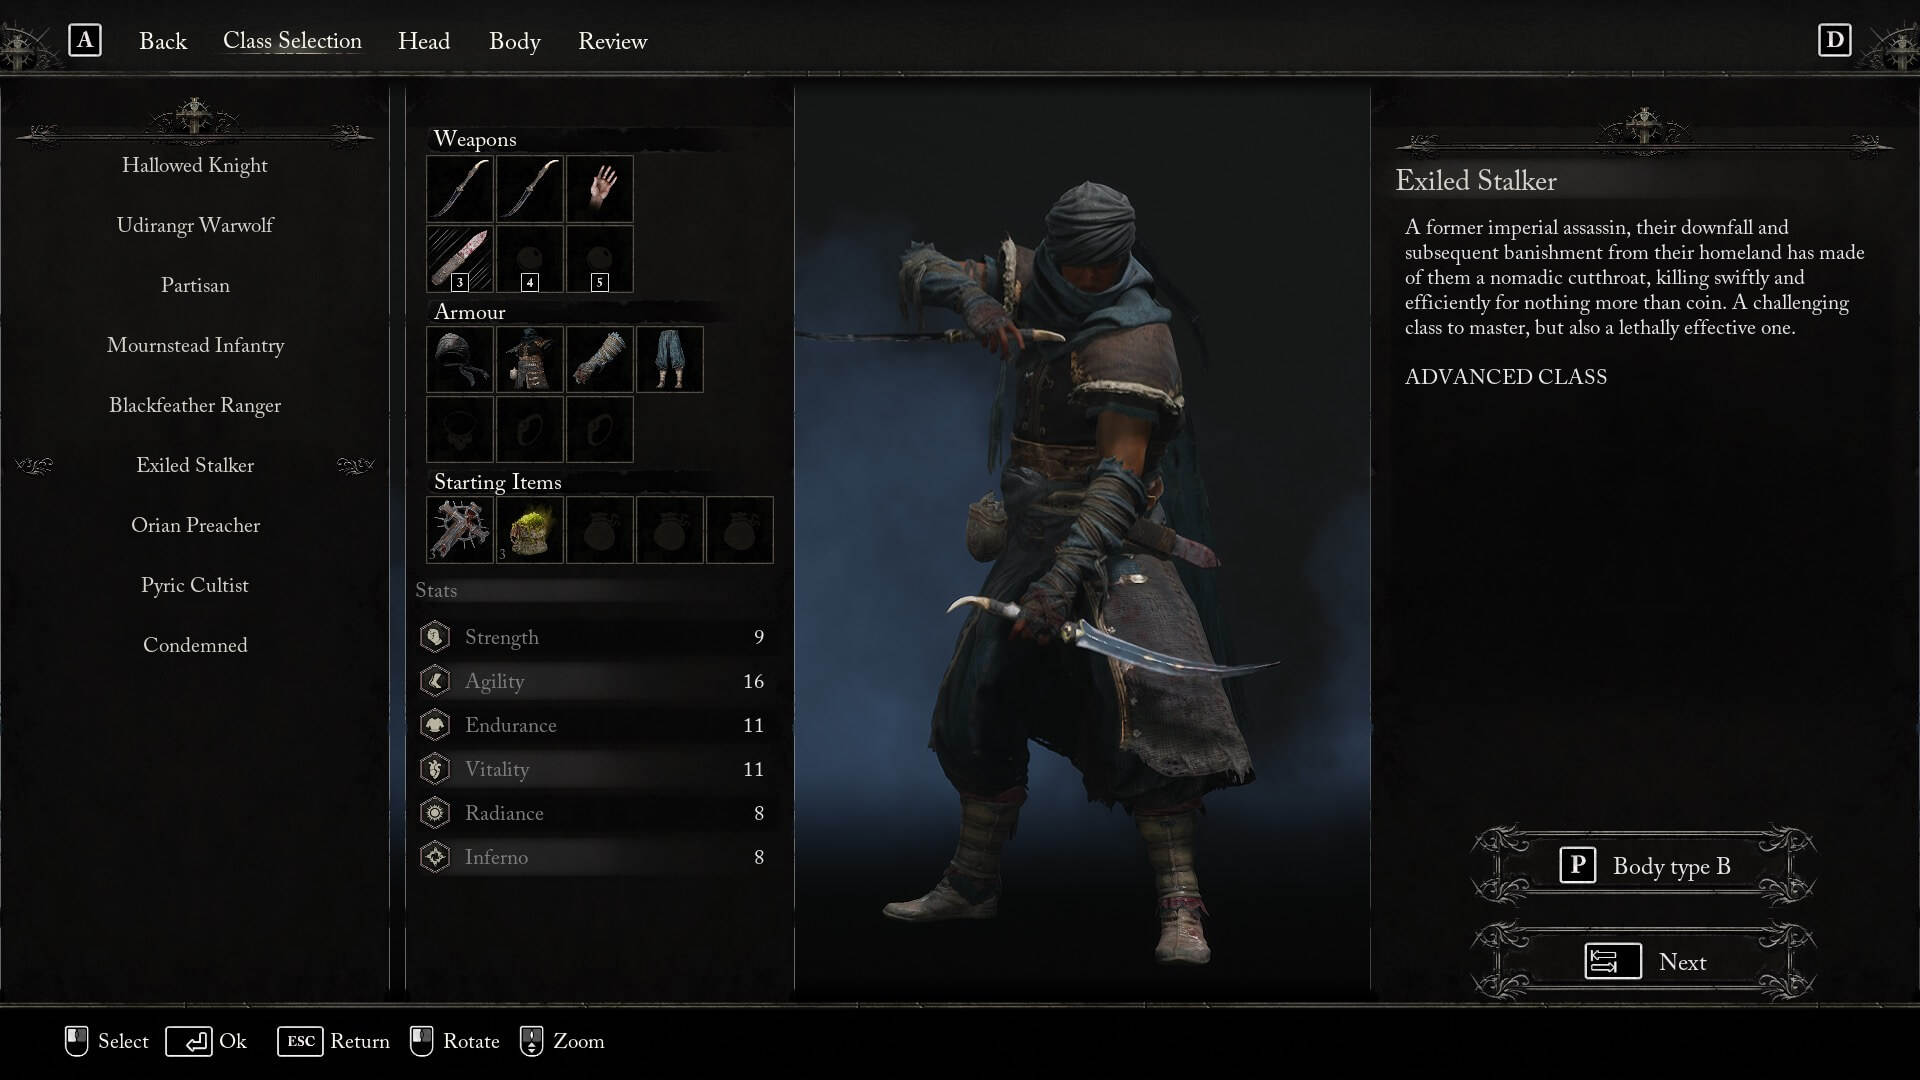 Lords of the Fallen Exiled Stalker Class